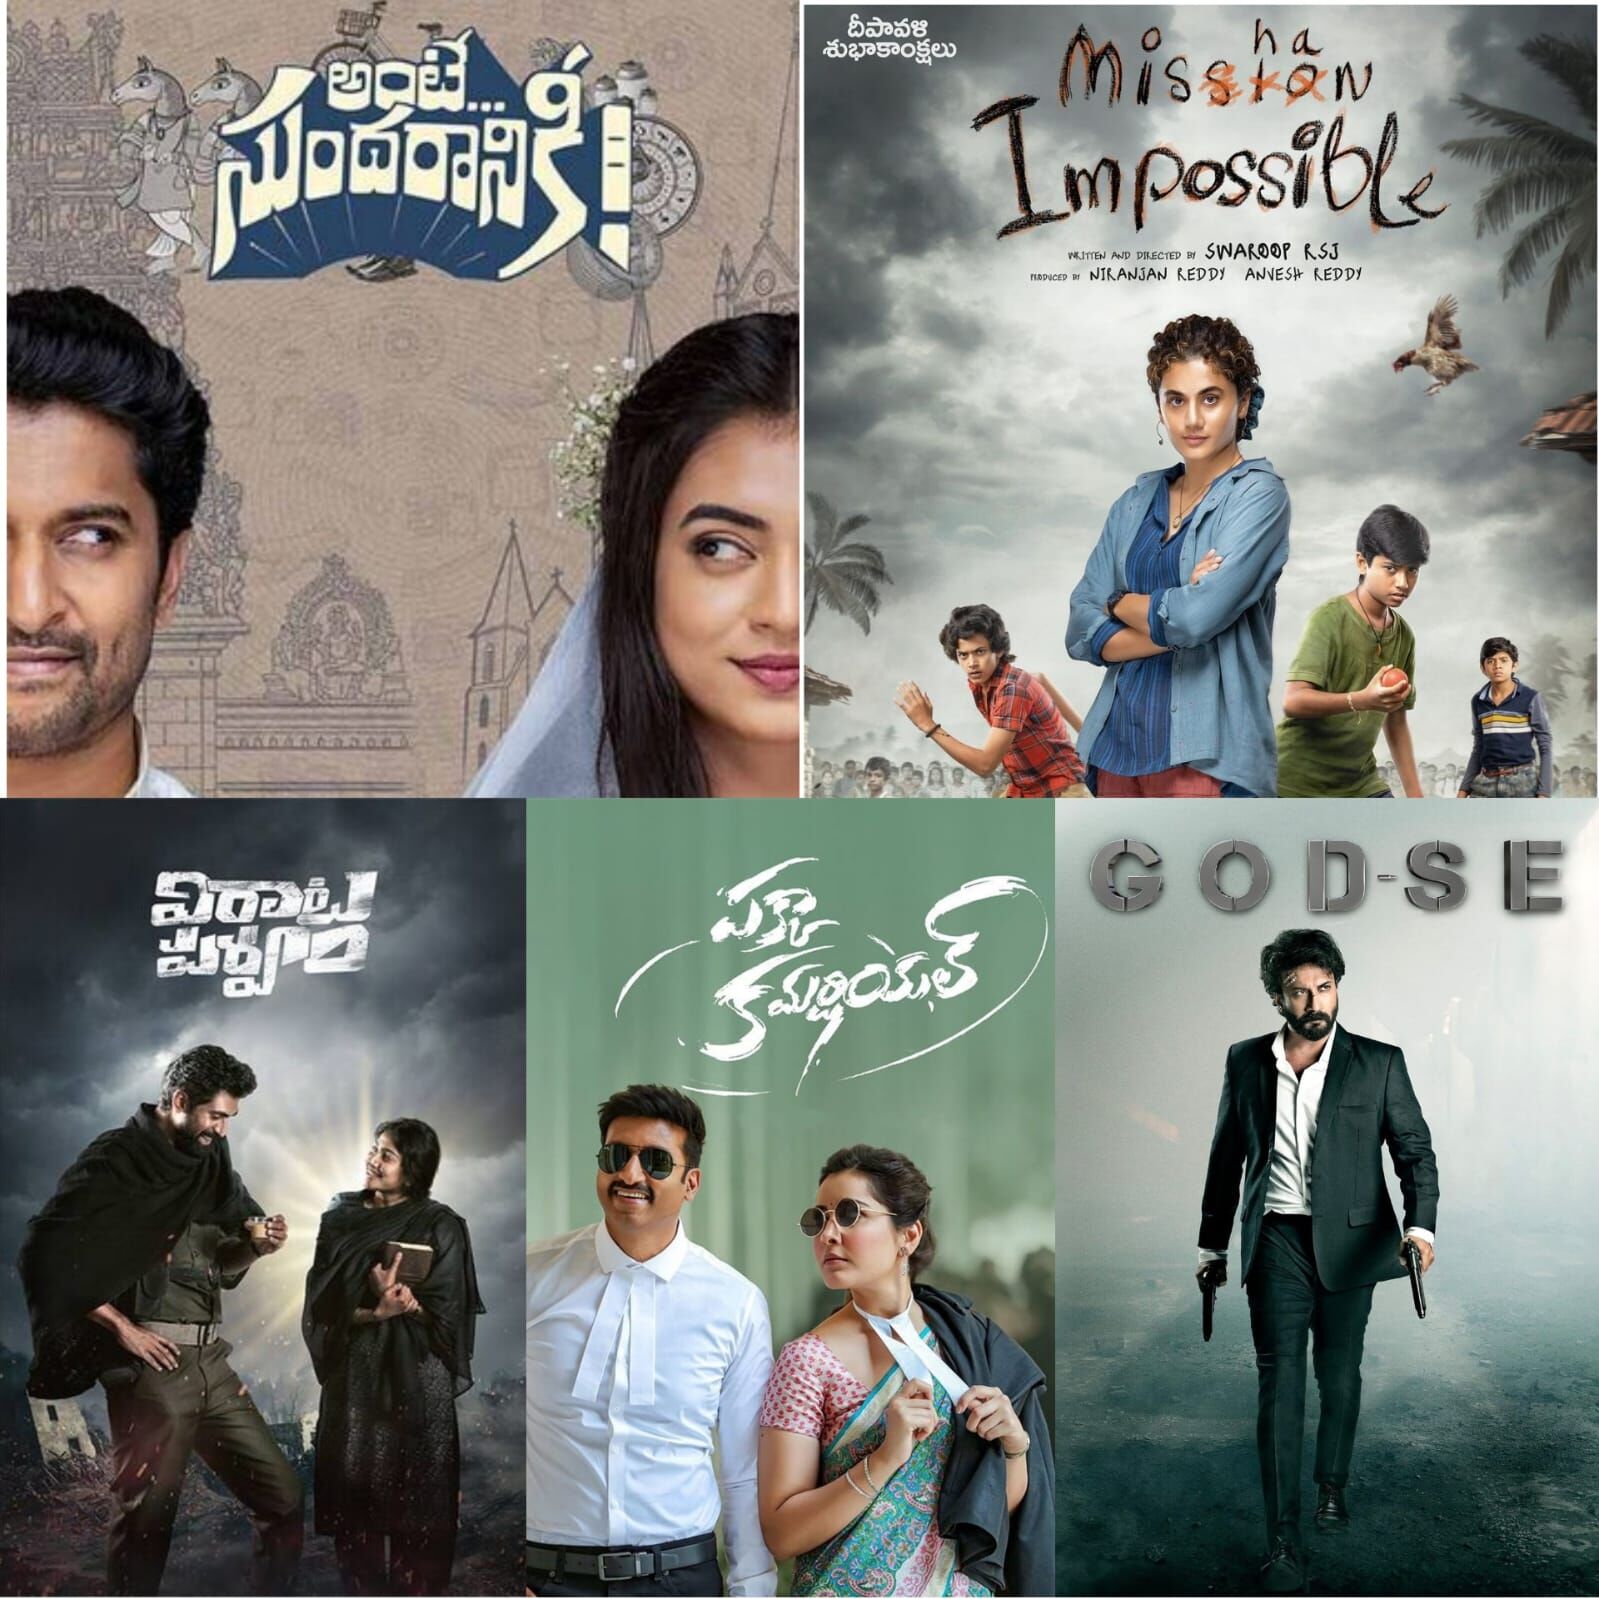 Top 2022 Telugu movies and shows to watch on Netflix before the year ends